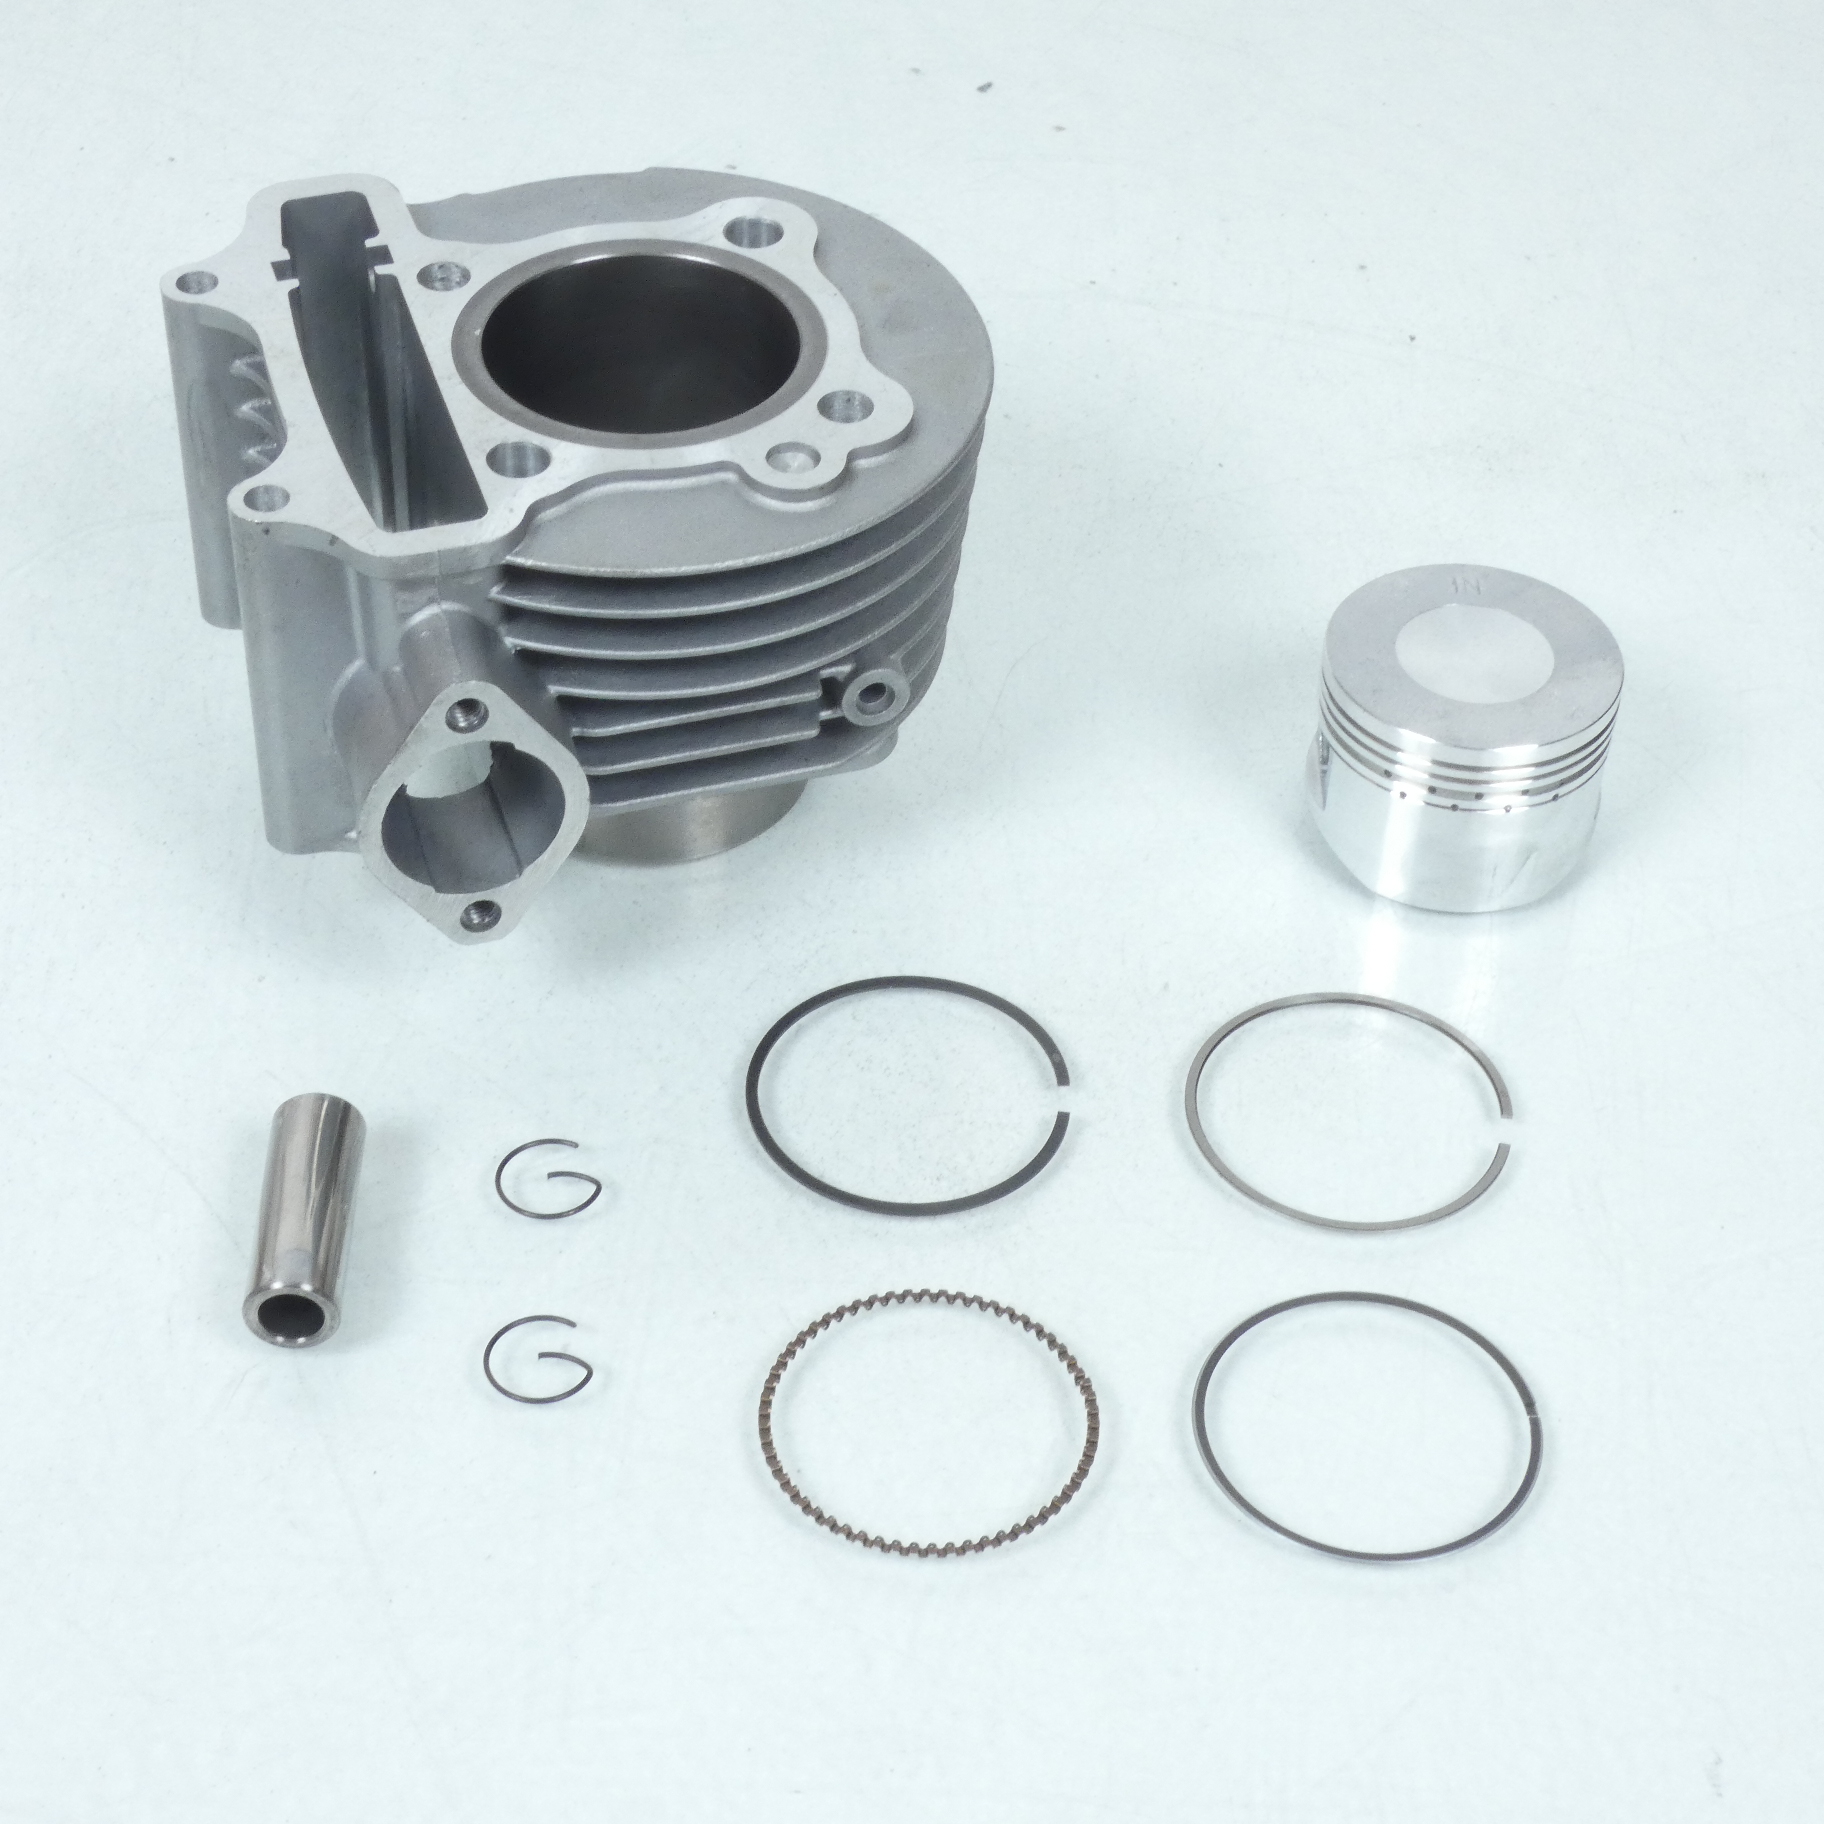 Kit Cylindre piston Ø51.8mm Sifam pour scooter Baotian Bt T-7 125 GY6 Axe Ø15mm